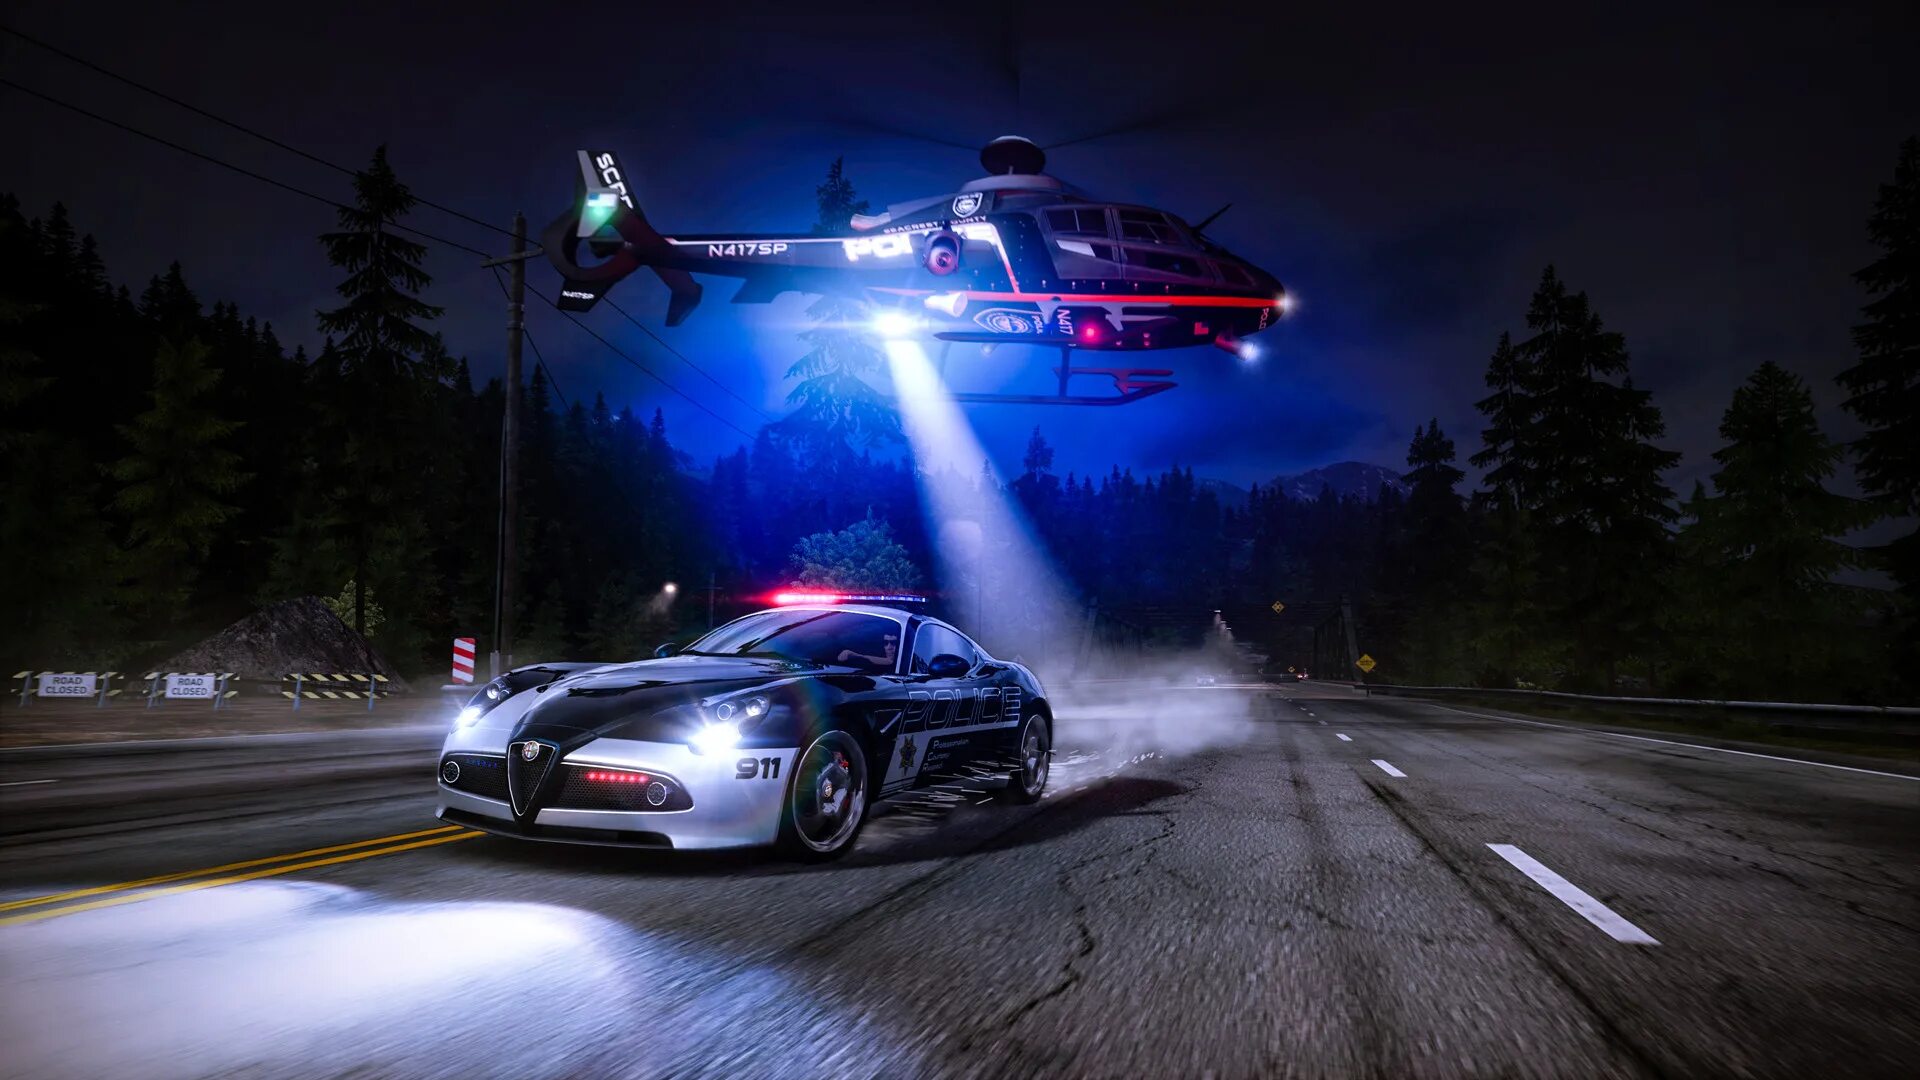 Need for speed hot pursuit remastered. Need for Speed hot Pursuit ремастер. NFS хот персьют. Need for Speed hot Pursuit Remastered 2020. Нфс хот пурсуит 2020 Ремастеред.